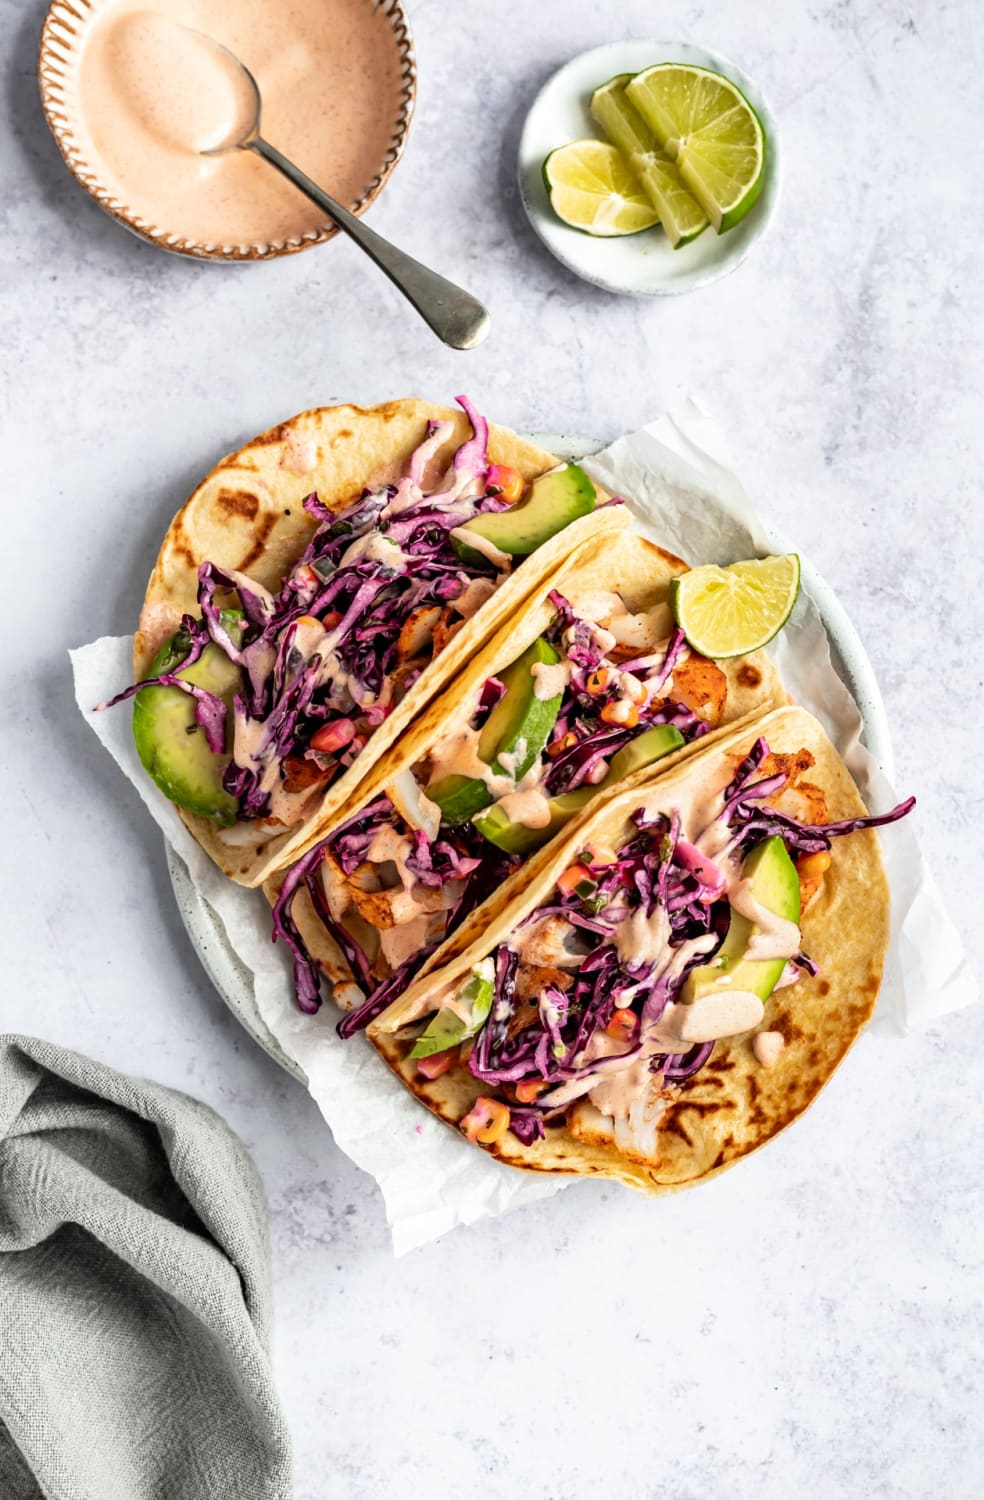 Best Ever Fish Tacos Made with Seasoned Cod, Corn Slaw & Creamy Sauce